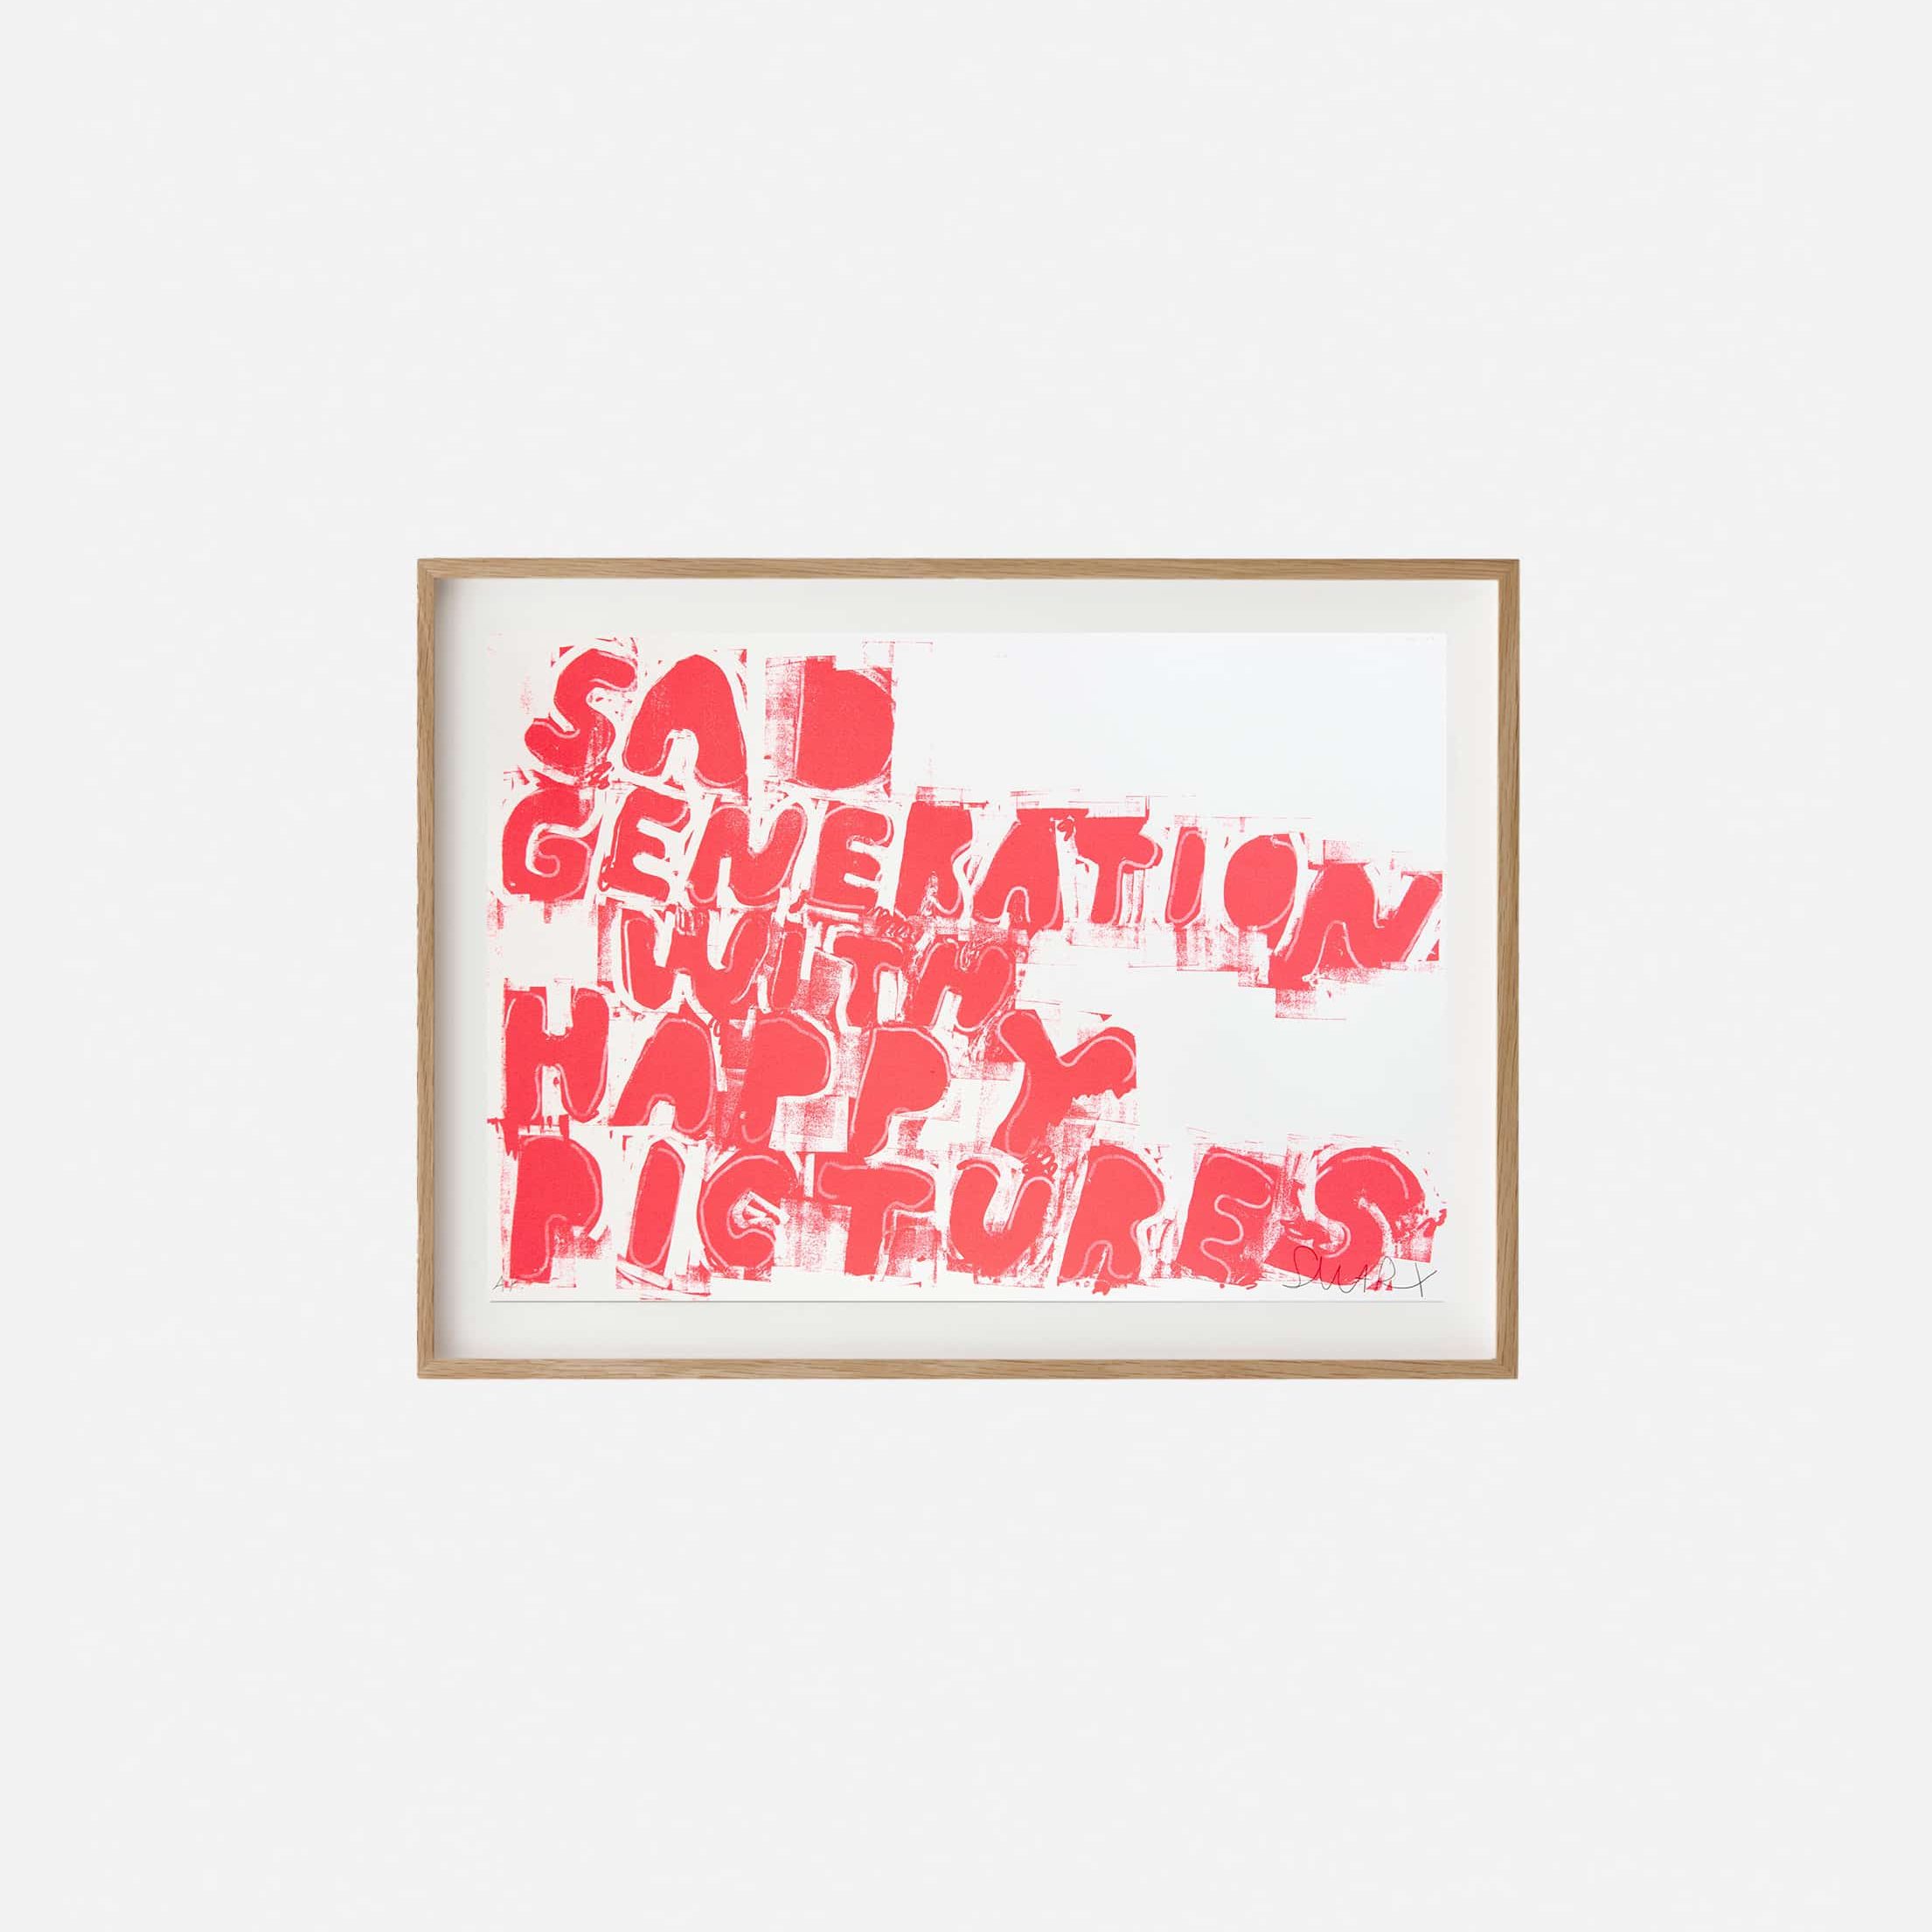 Stefan Marx - Sad Generation With Happy Pictures - red